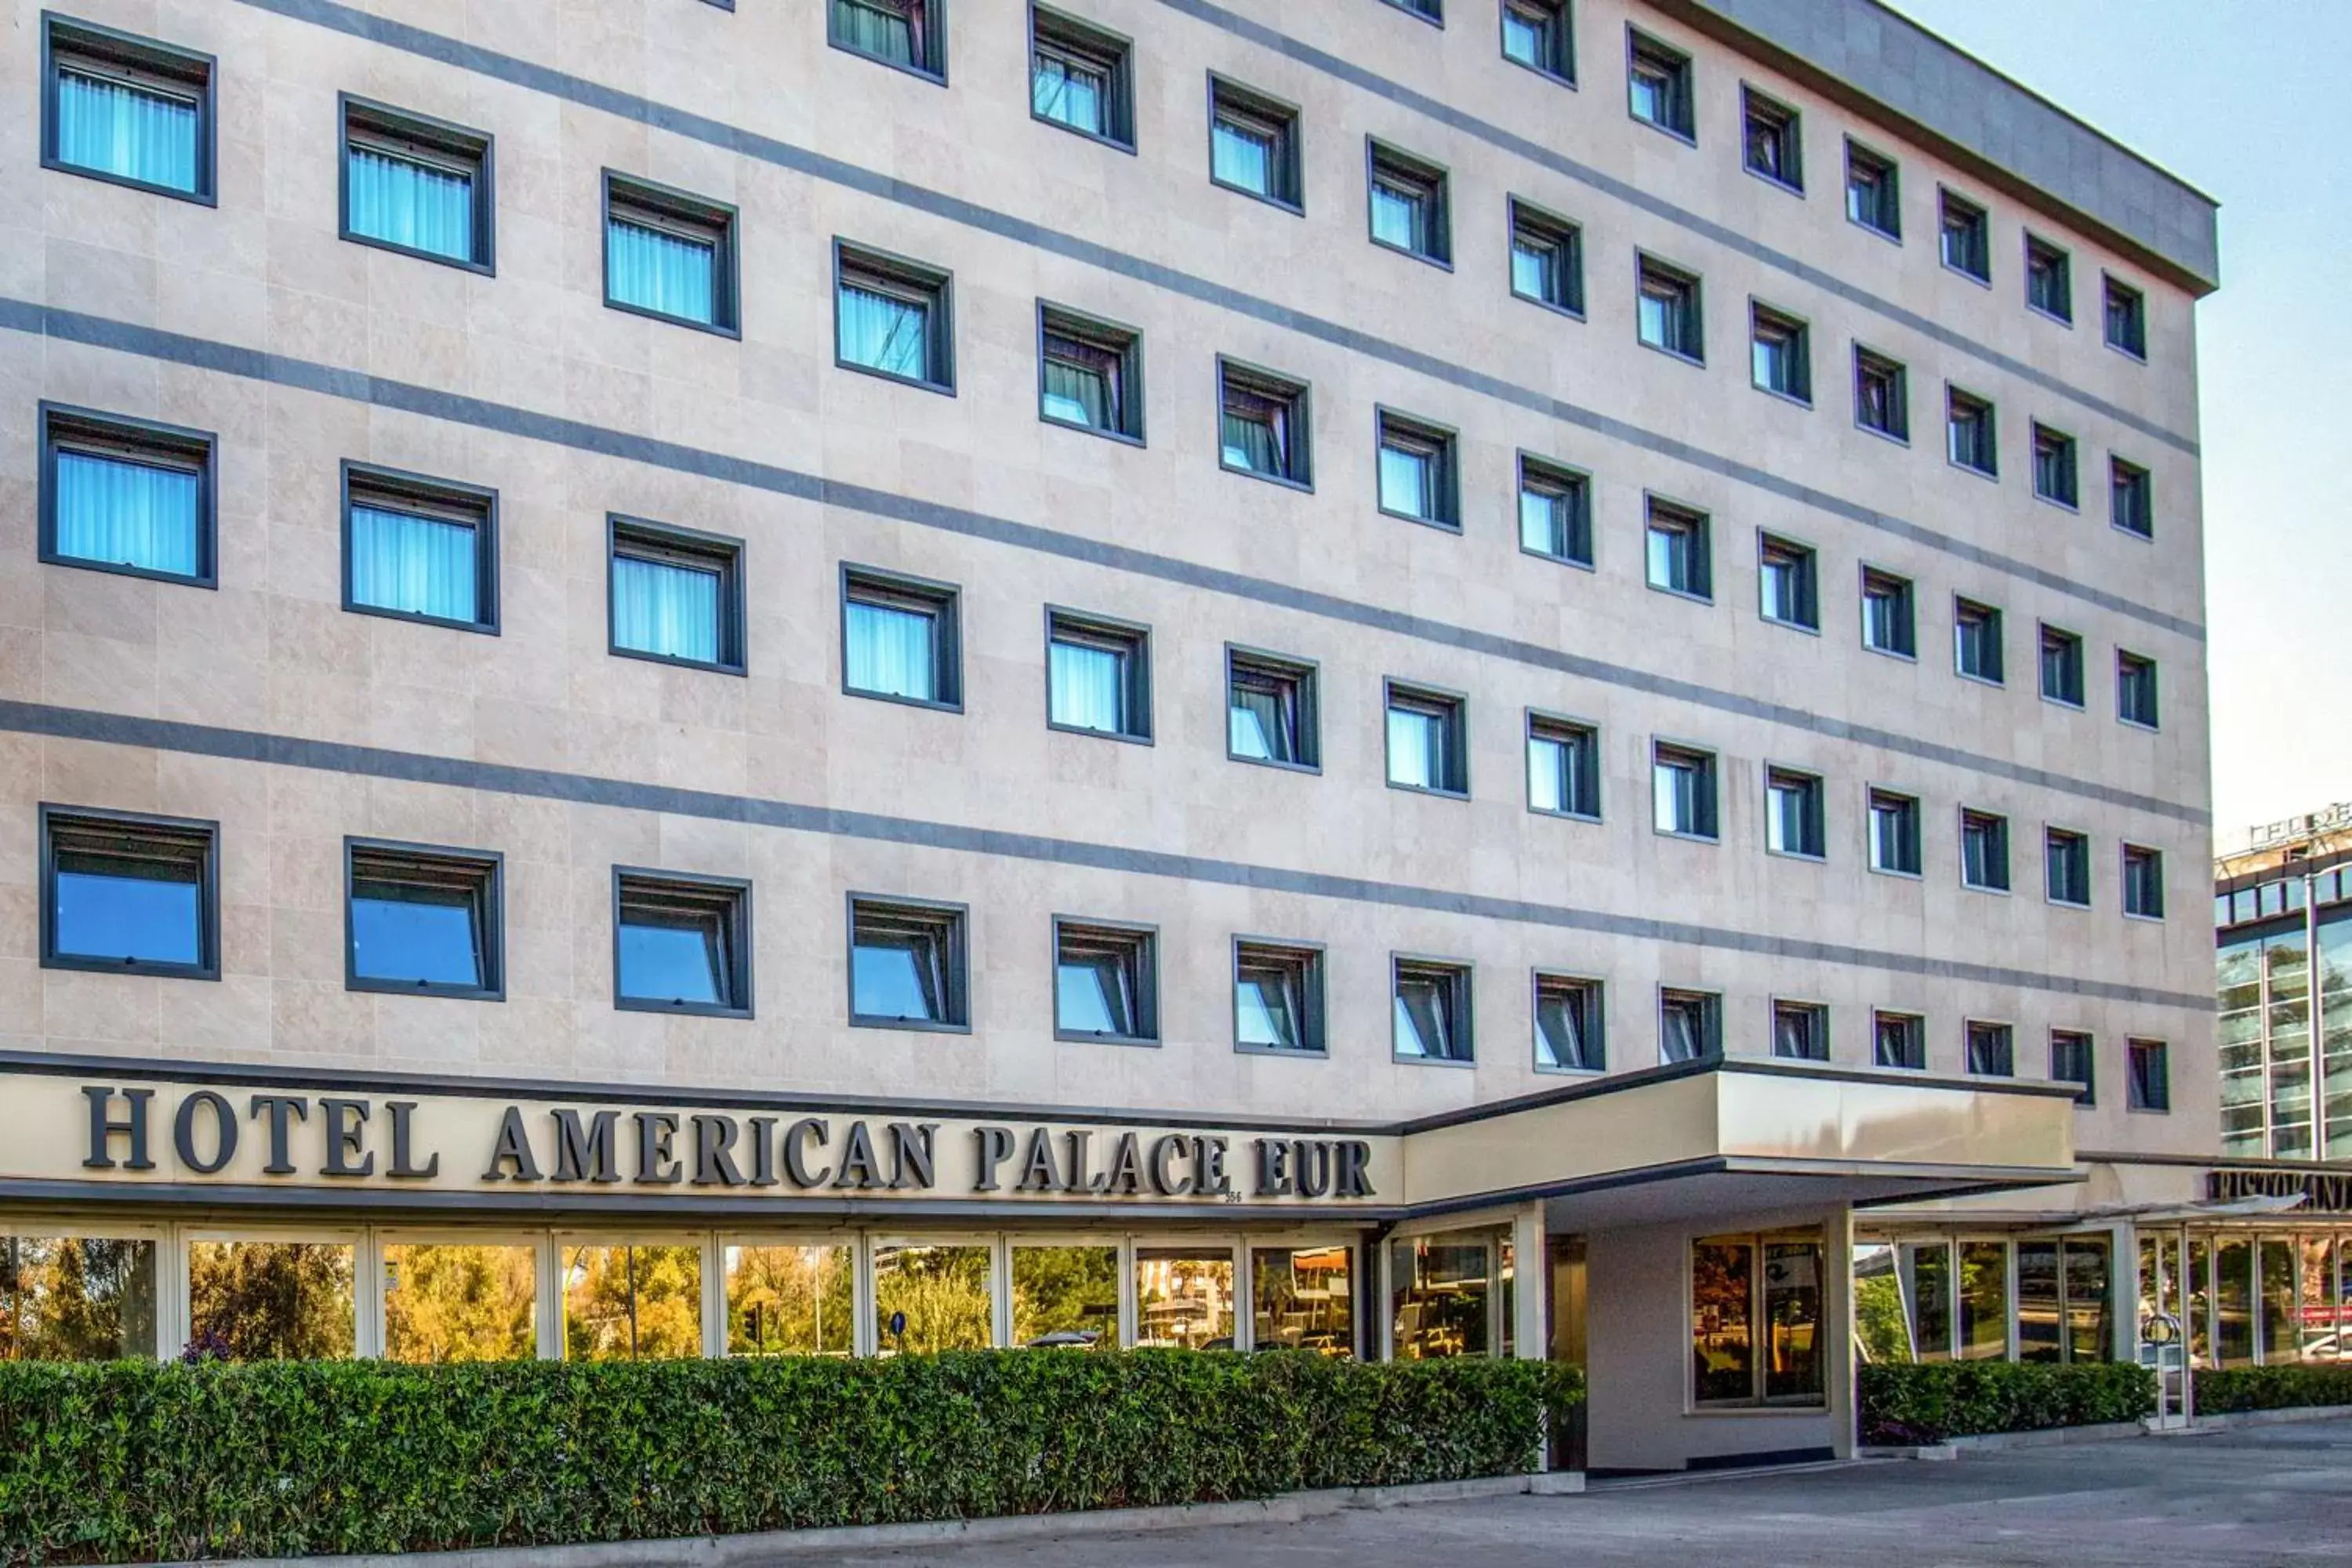 Property Building in Hotel American Palace Eur